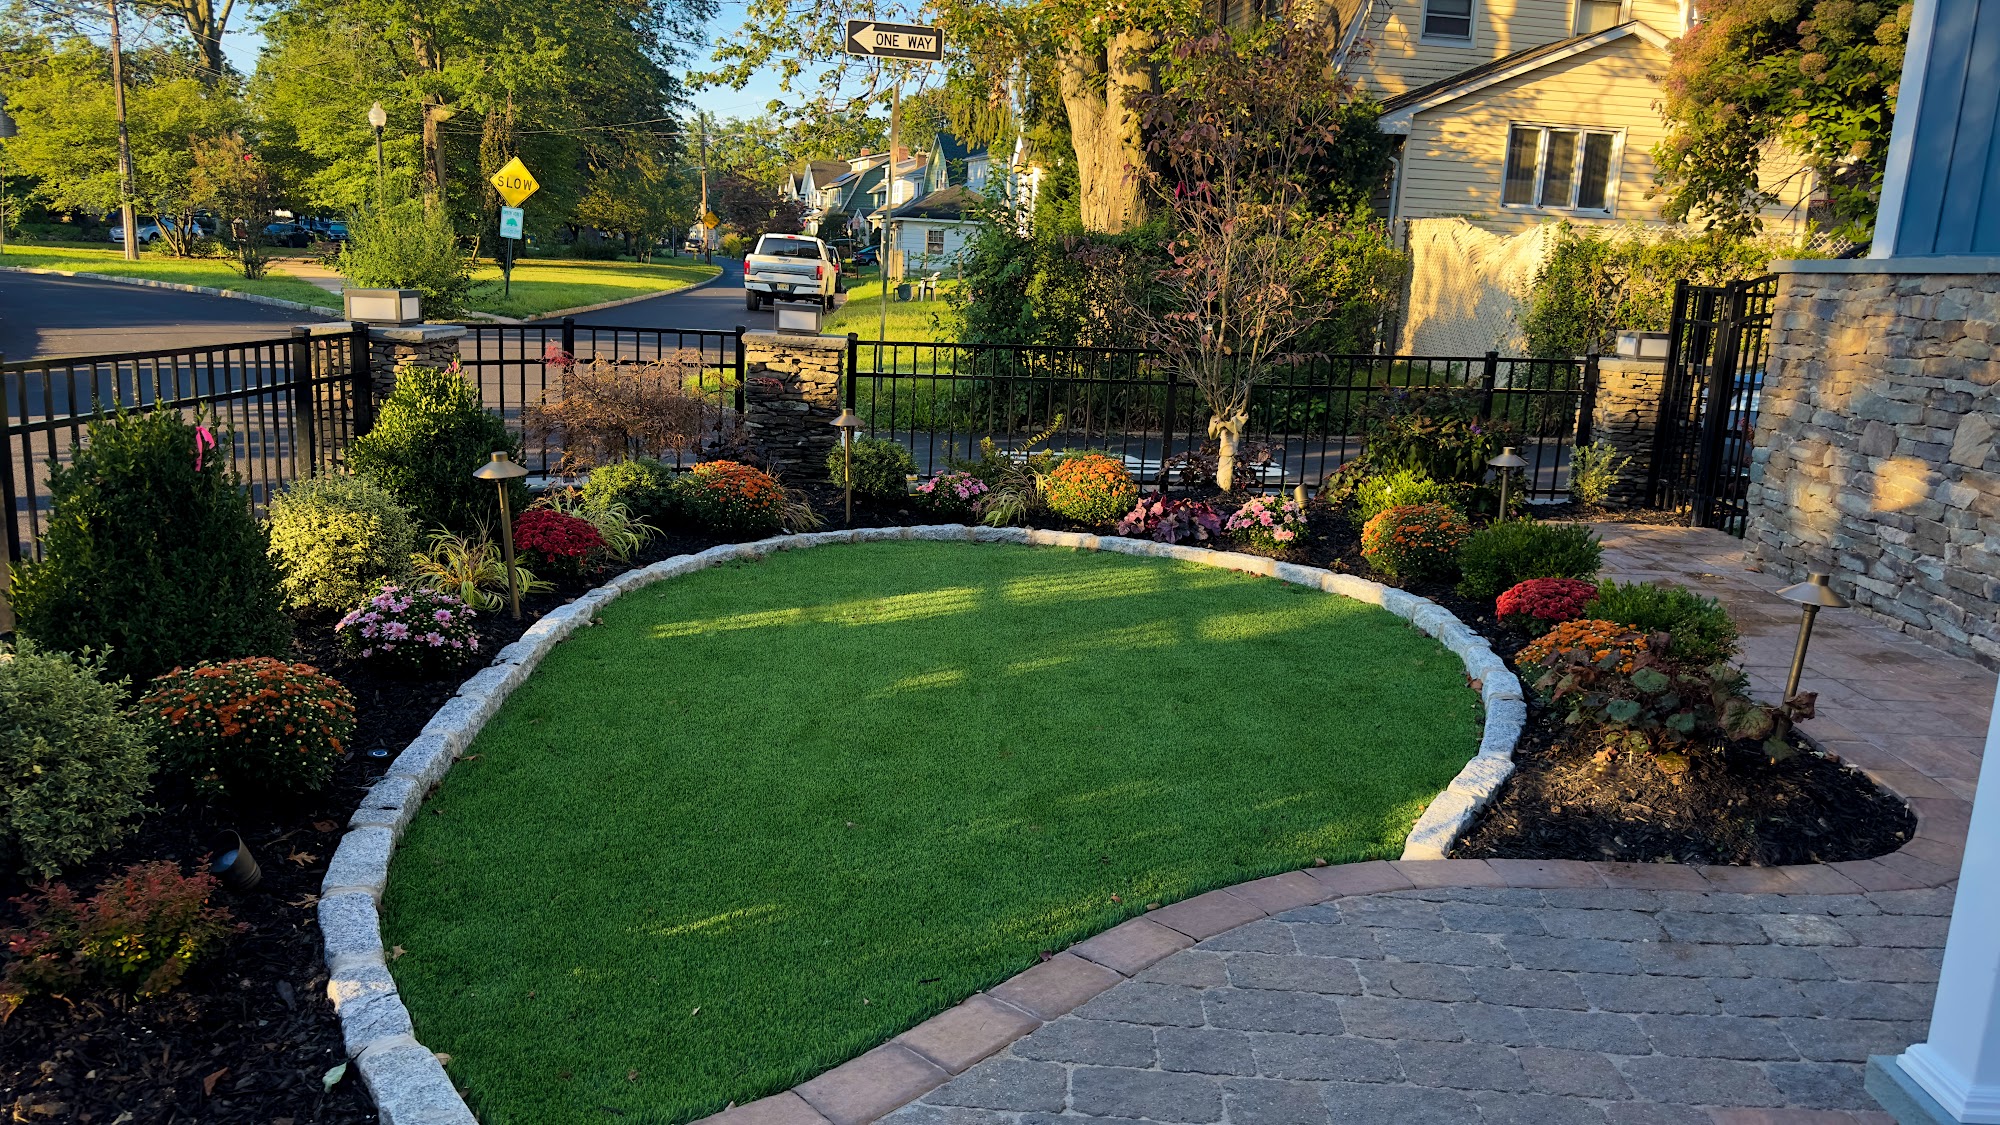 Charles and Son Construction & Landscaping, Inc